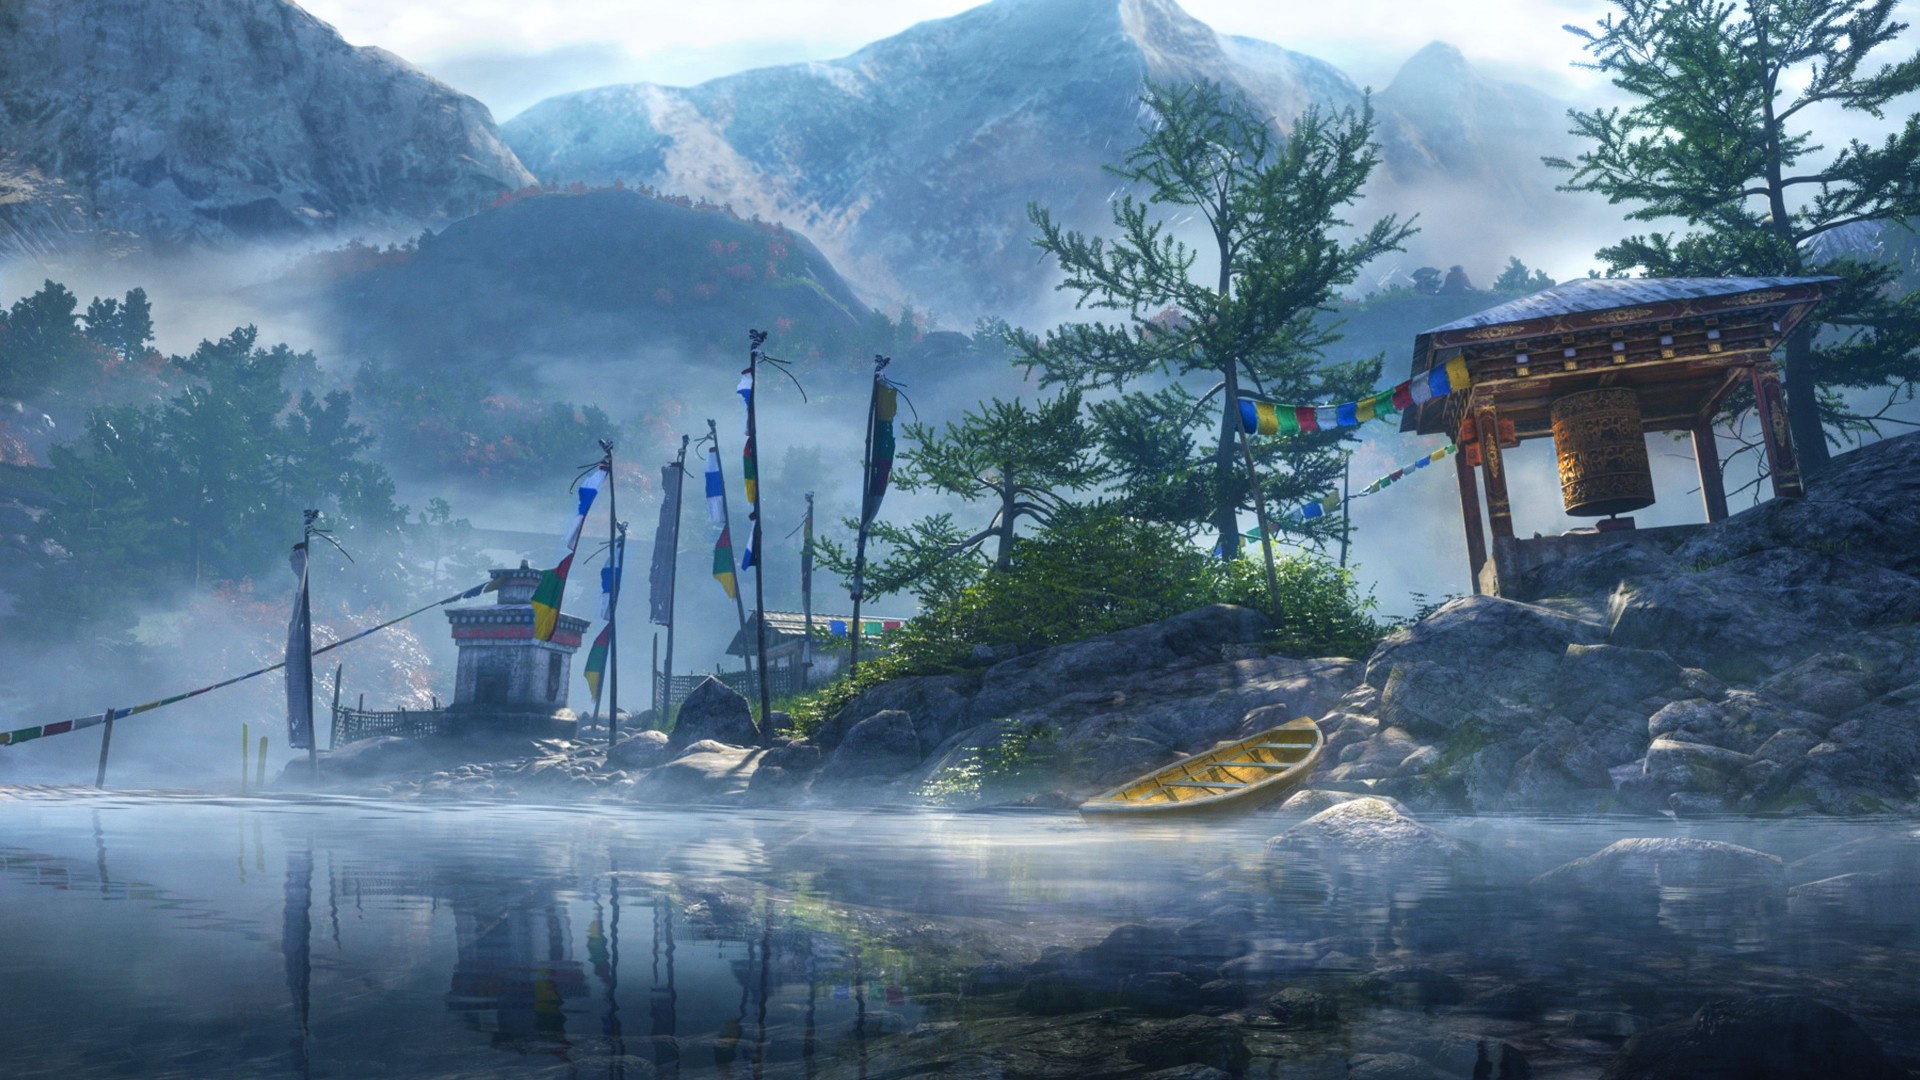 General 1920x1080 landscape trees water reflection lake ruins flag screen shot Far Cry Far Cry 4 Ubisoft